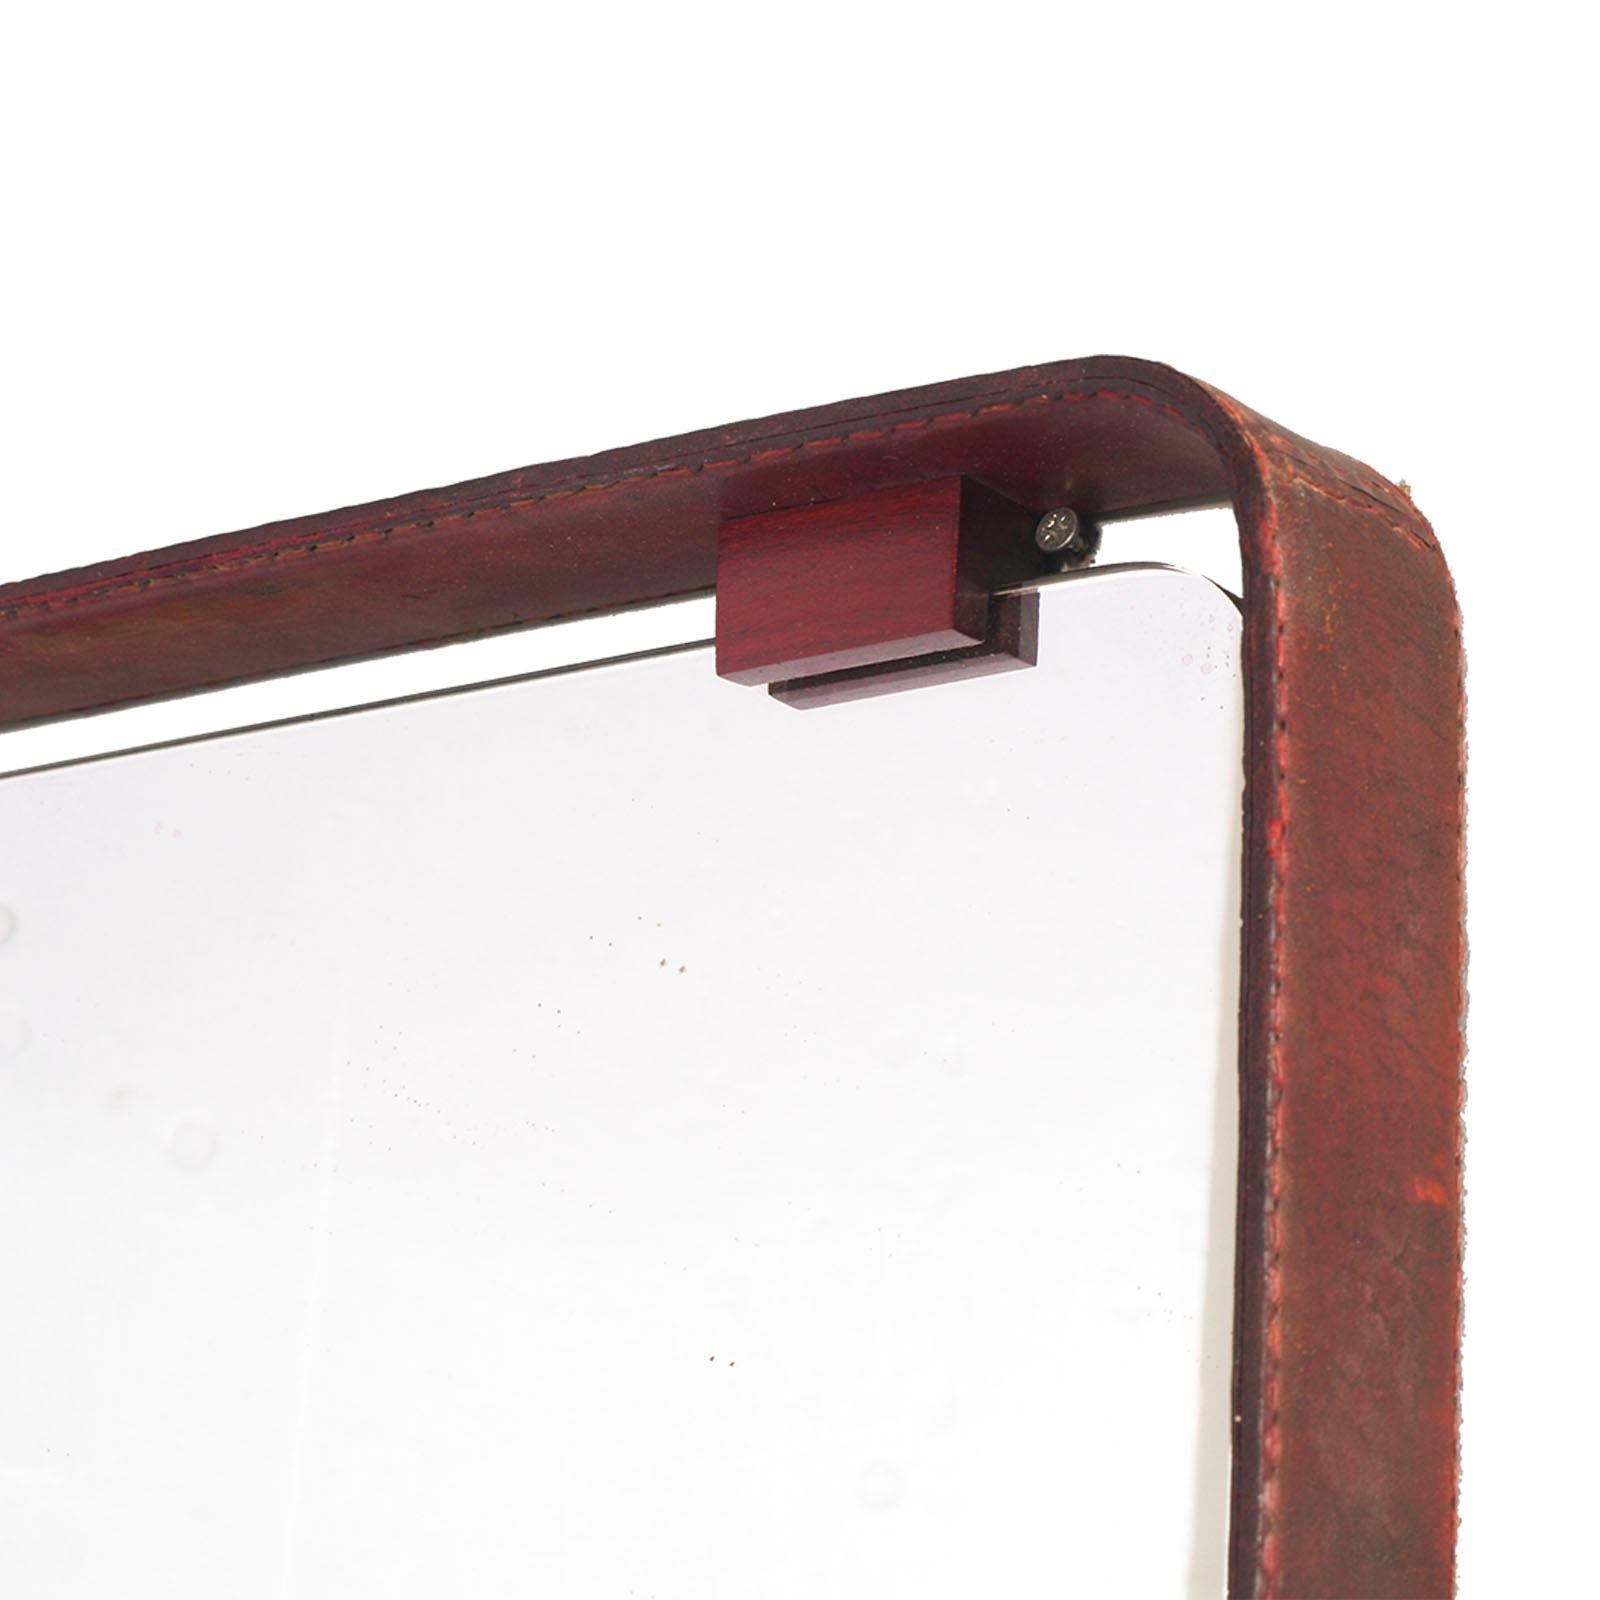 Italian 1950s Mirror, Steel Frame with Leather, Fontanit Branded Glass, by Fontana Arte